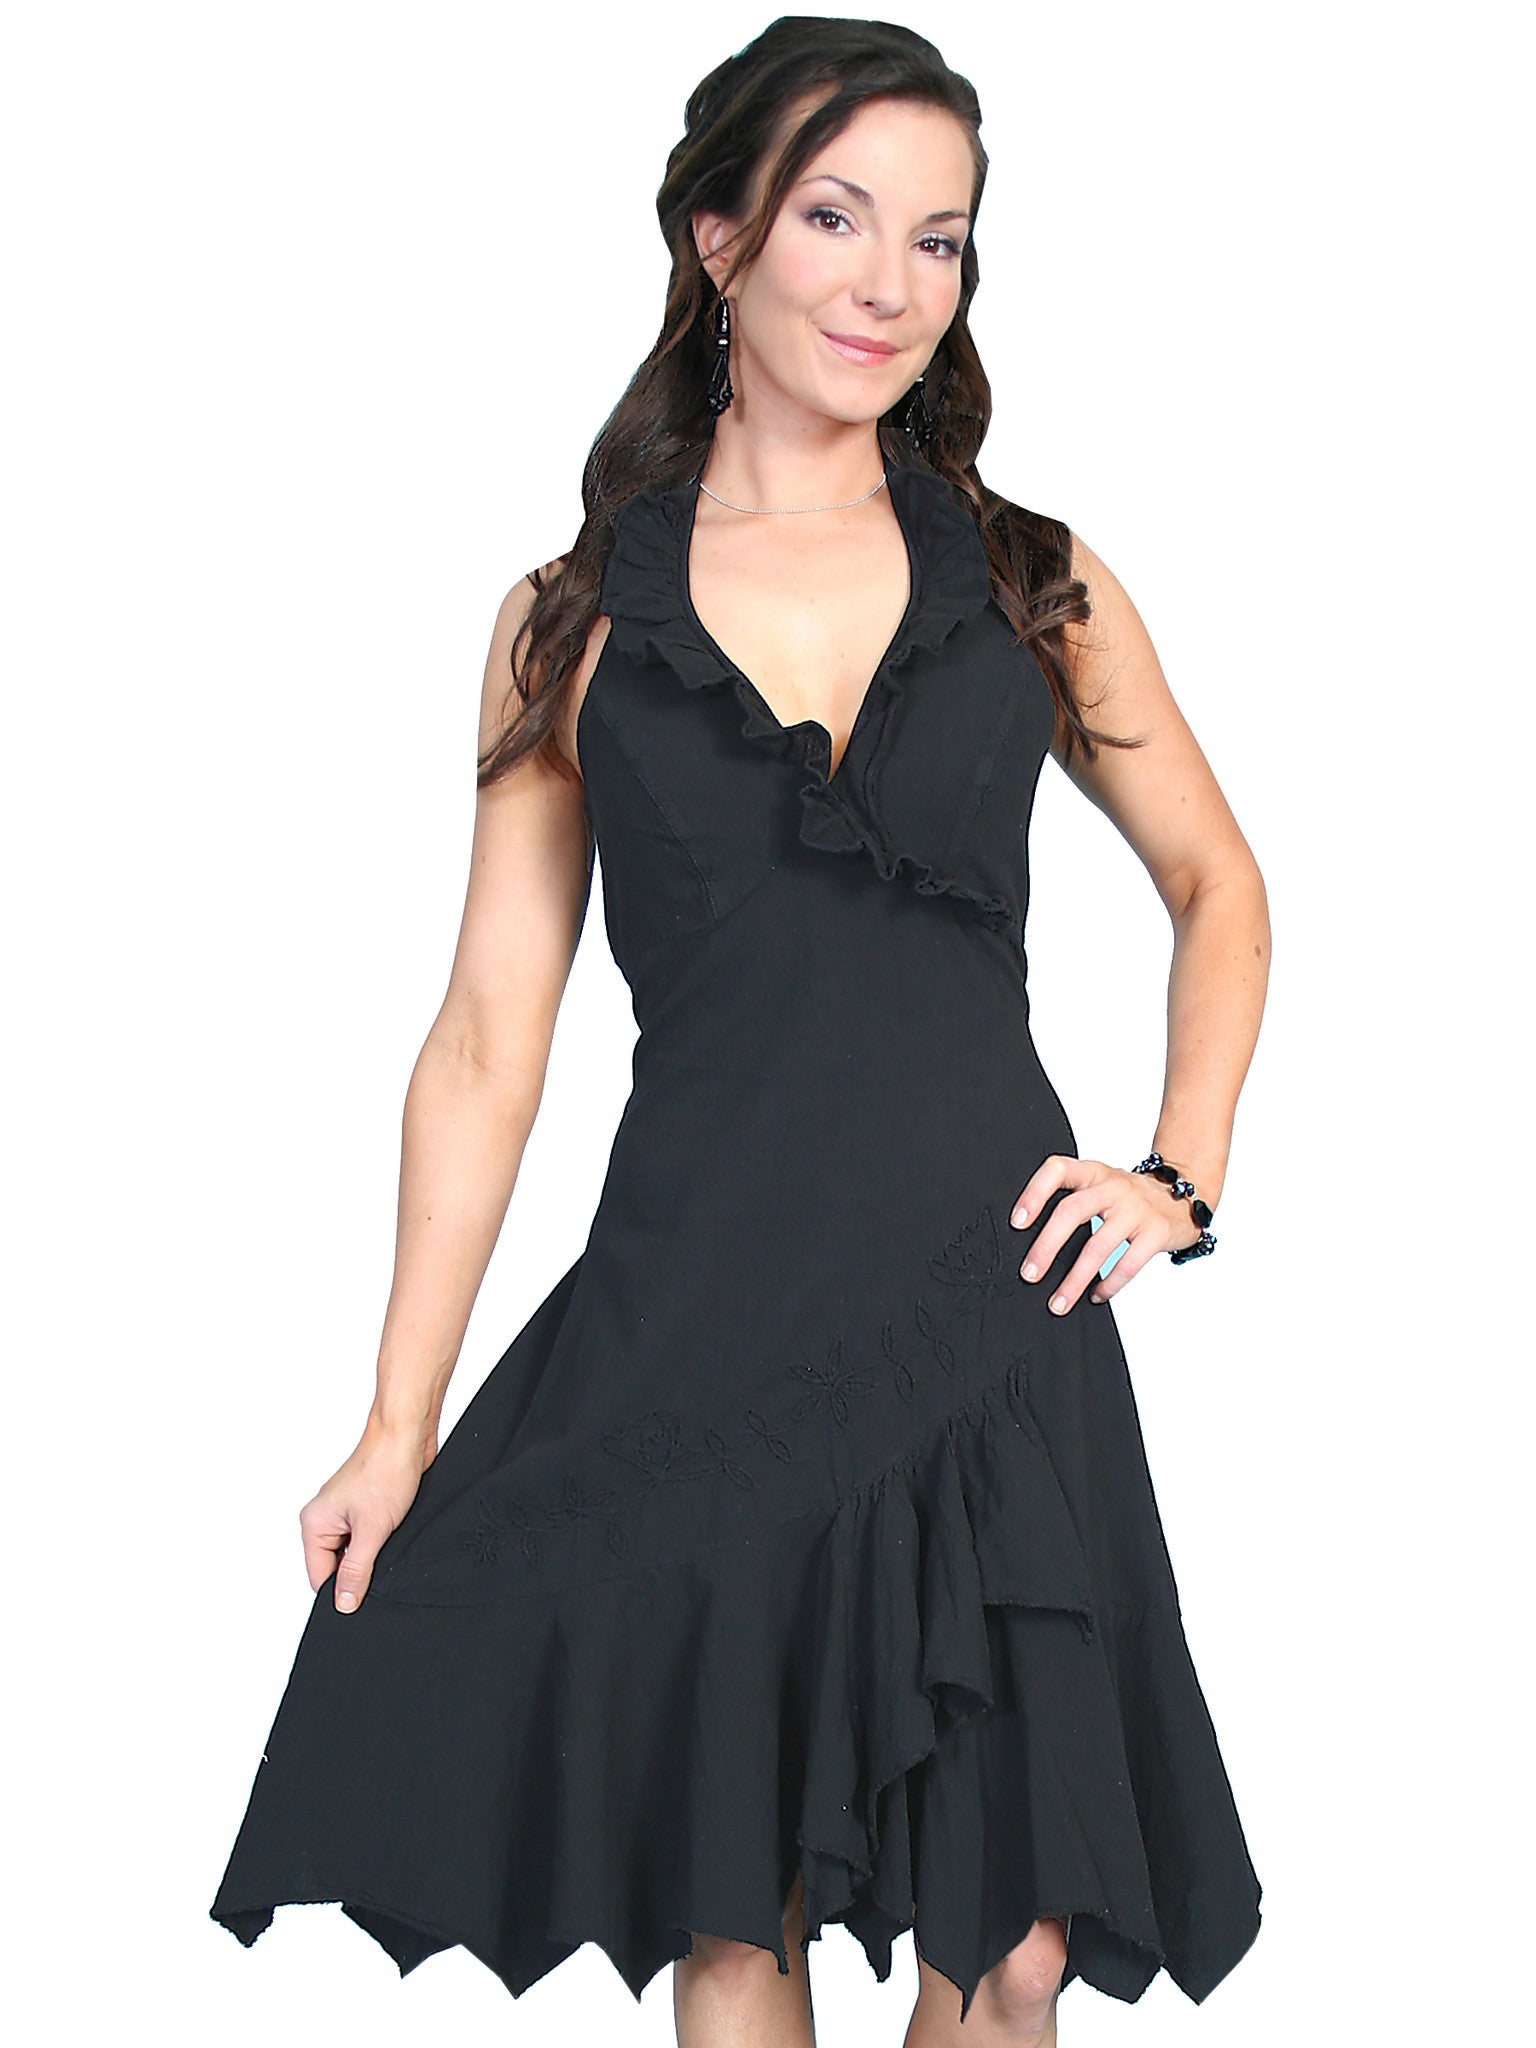 Scully Womens Cantina Collection Halter Dress, Ruffles, Black. Front View